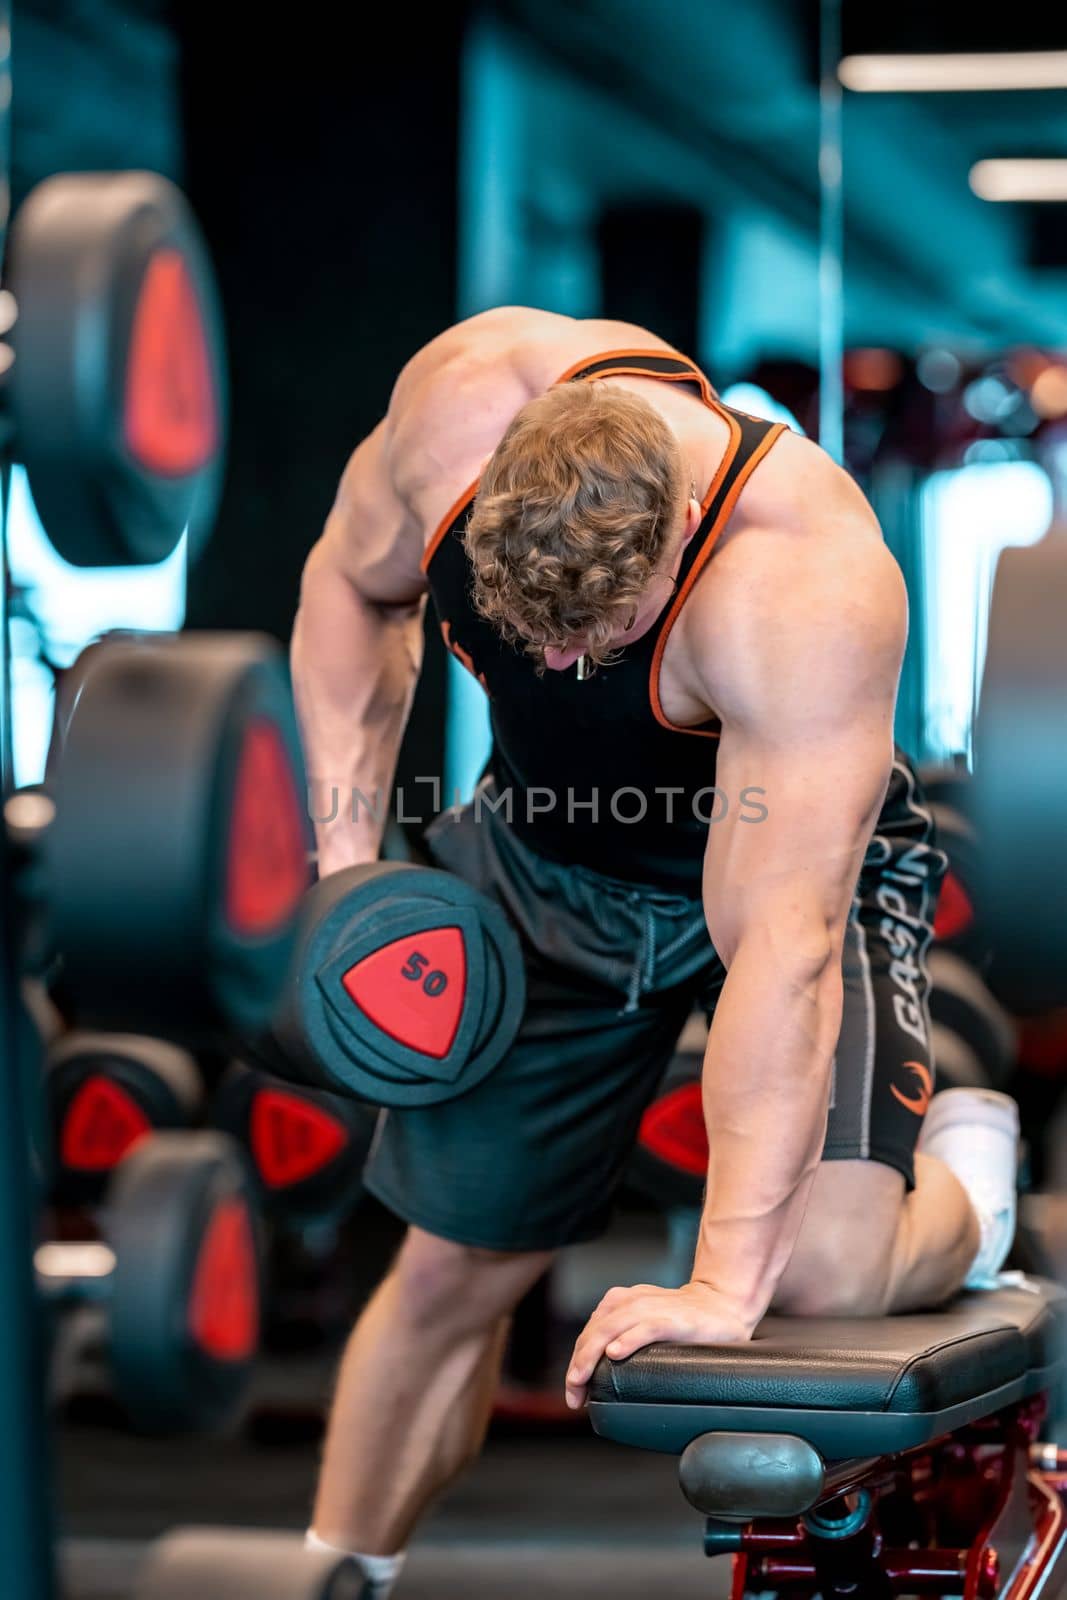 one-handed dumbbell pull-ups in a forward bend on a bench. High quality photo